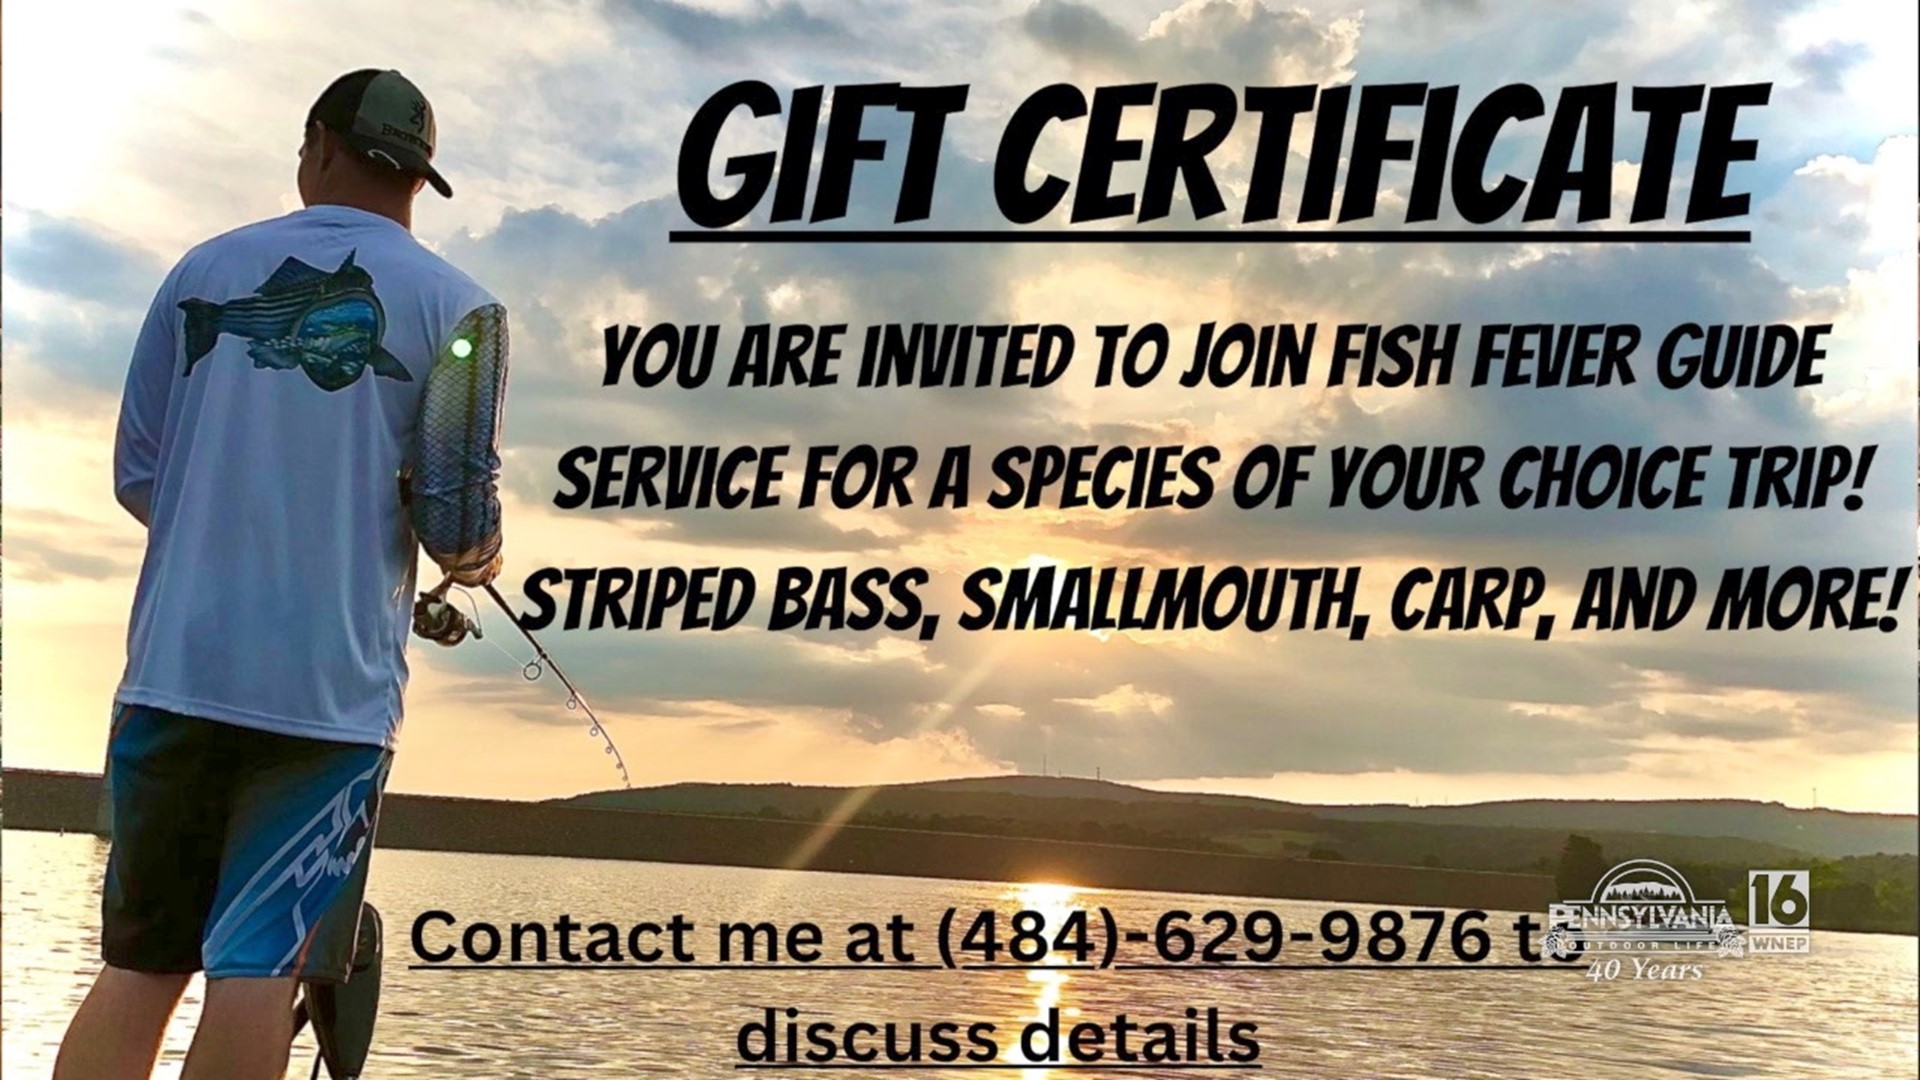 A trip of your choice from the newest fishing guide in our area.